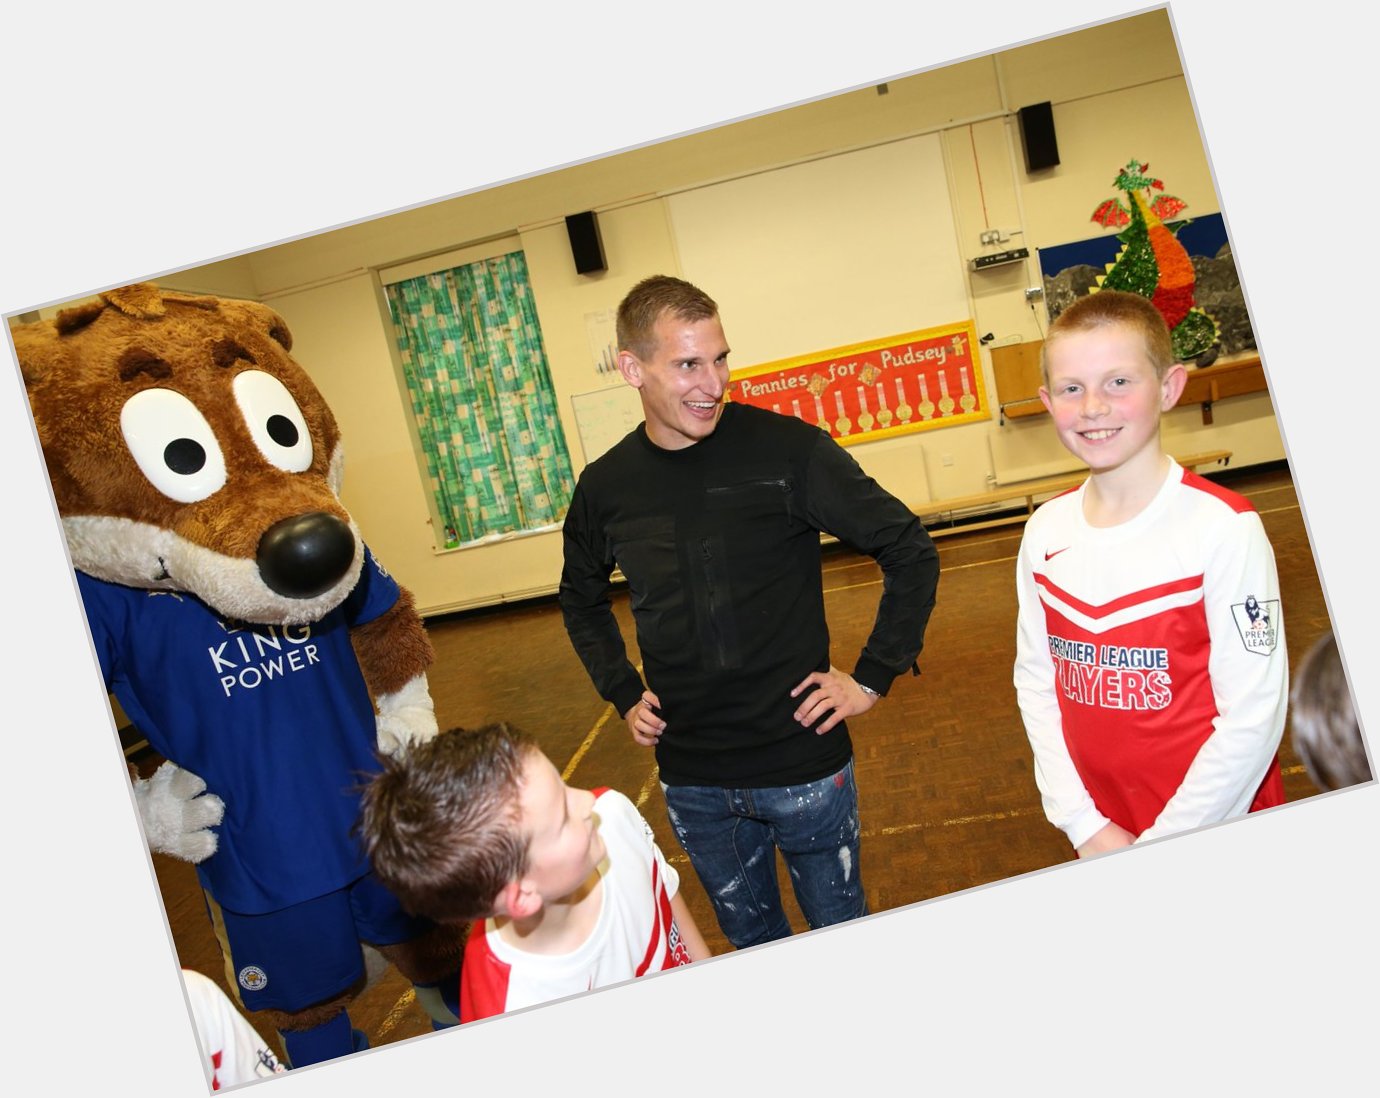  A very Happy Birthday to Marc Albrighton from all at the 